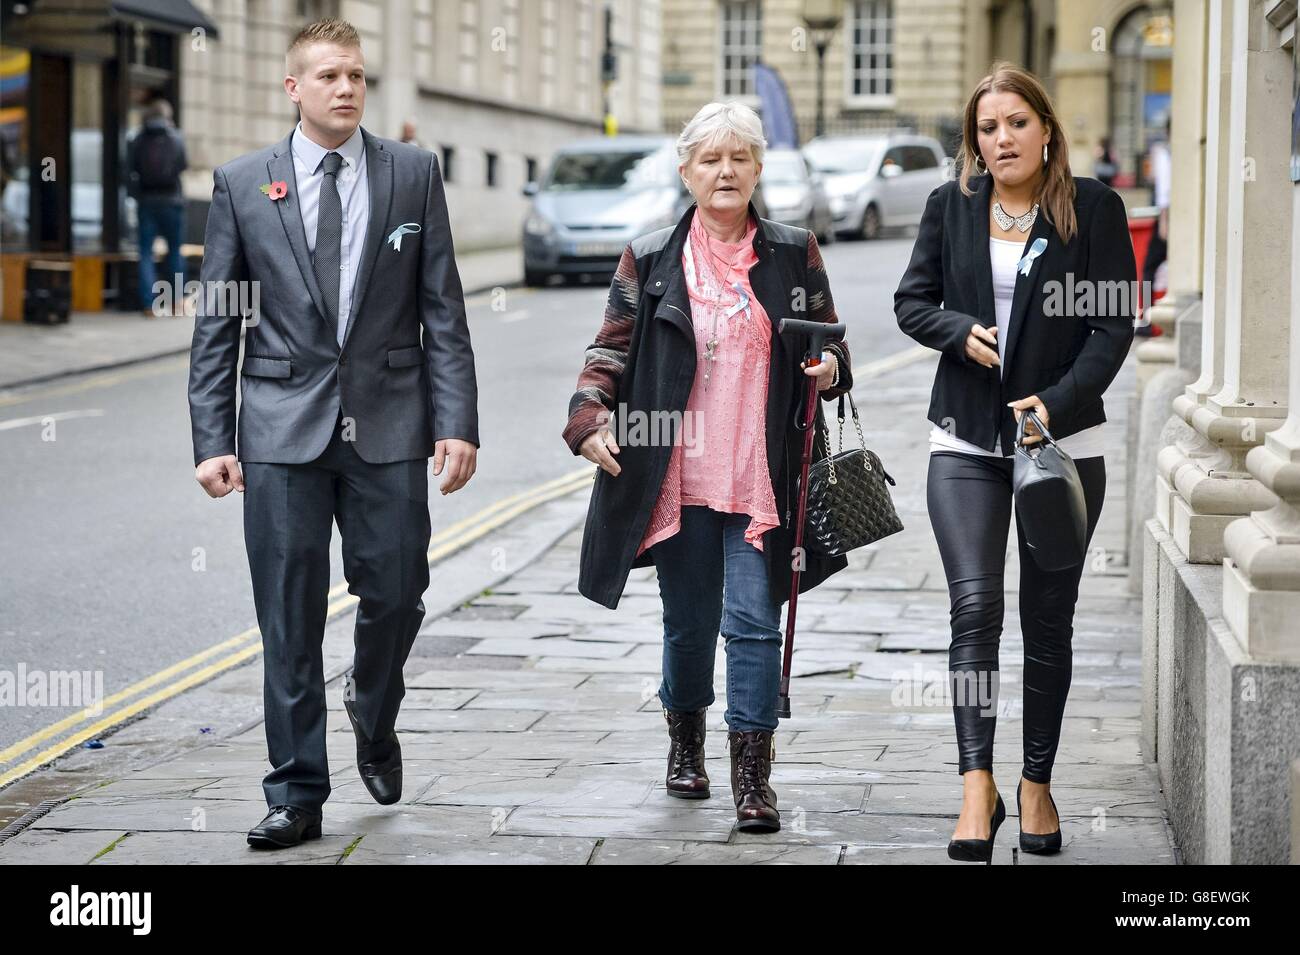 Family and friends of Becky Watts arrive at Bristol Crown Court for the trial into her murder. Stock Photo